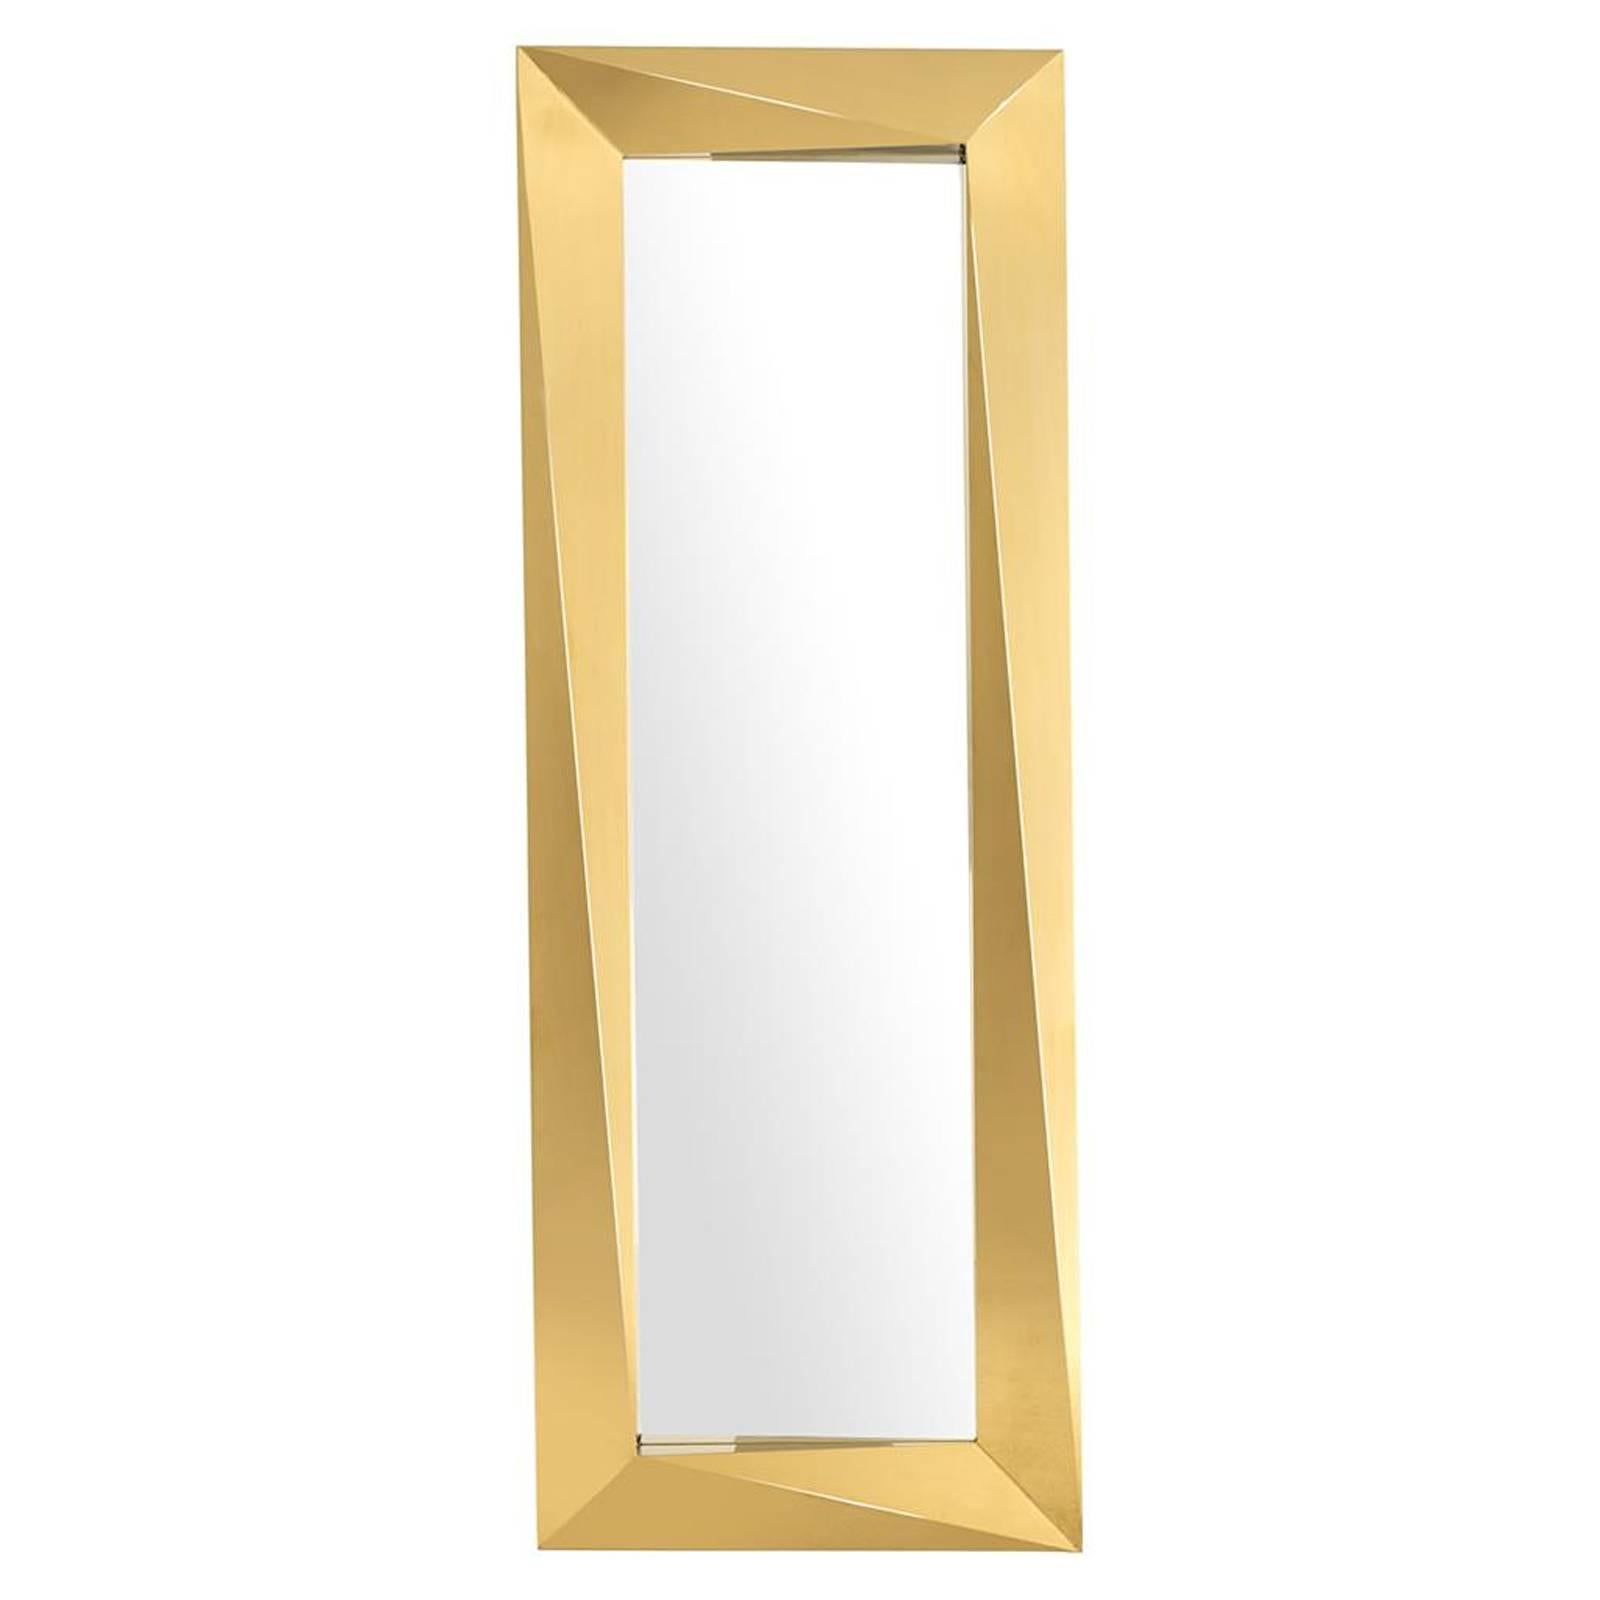 Mirror Axis with mirror glass and frame in gold finish
or frame in polished stainless steel. 
Also available in Axis square mirror in gold finish
or in polished stainless steel. 
